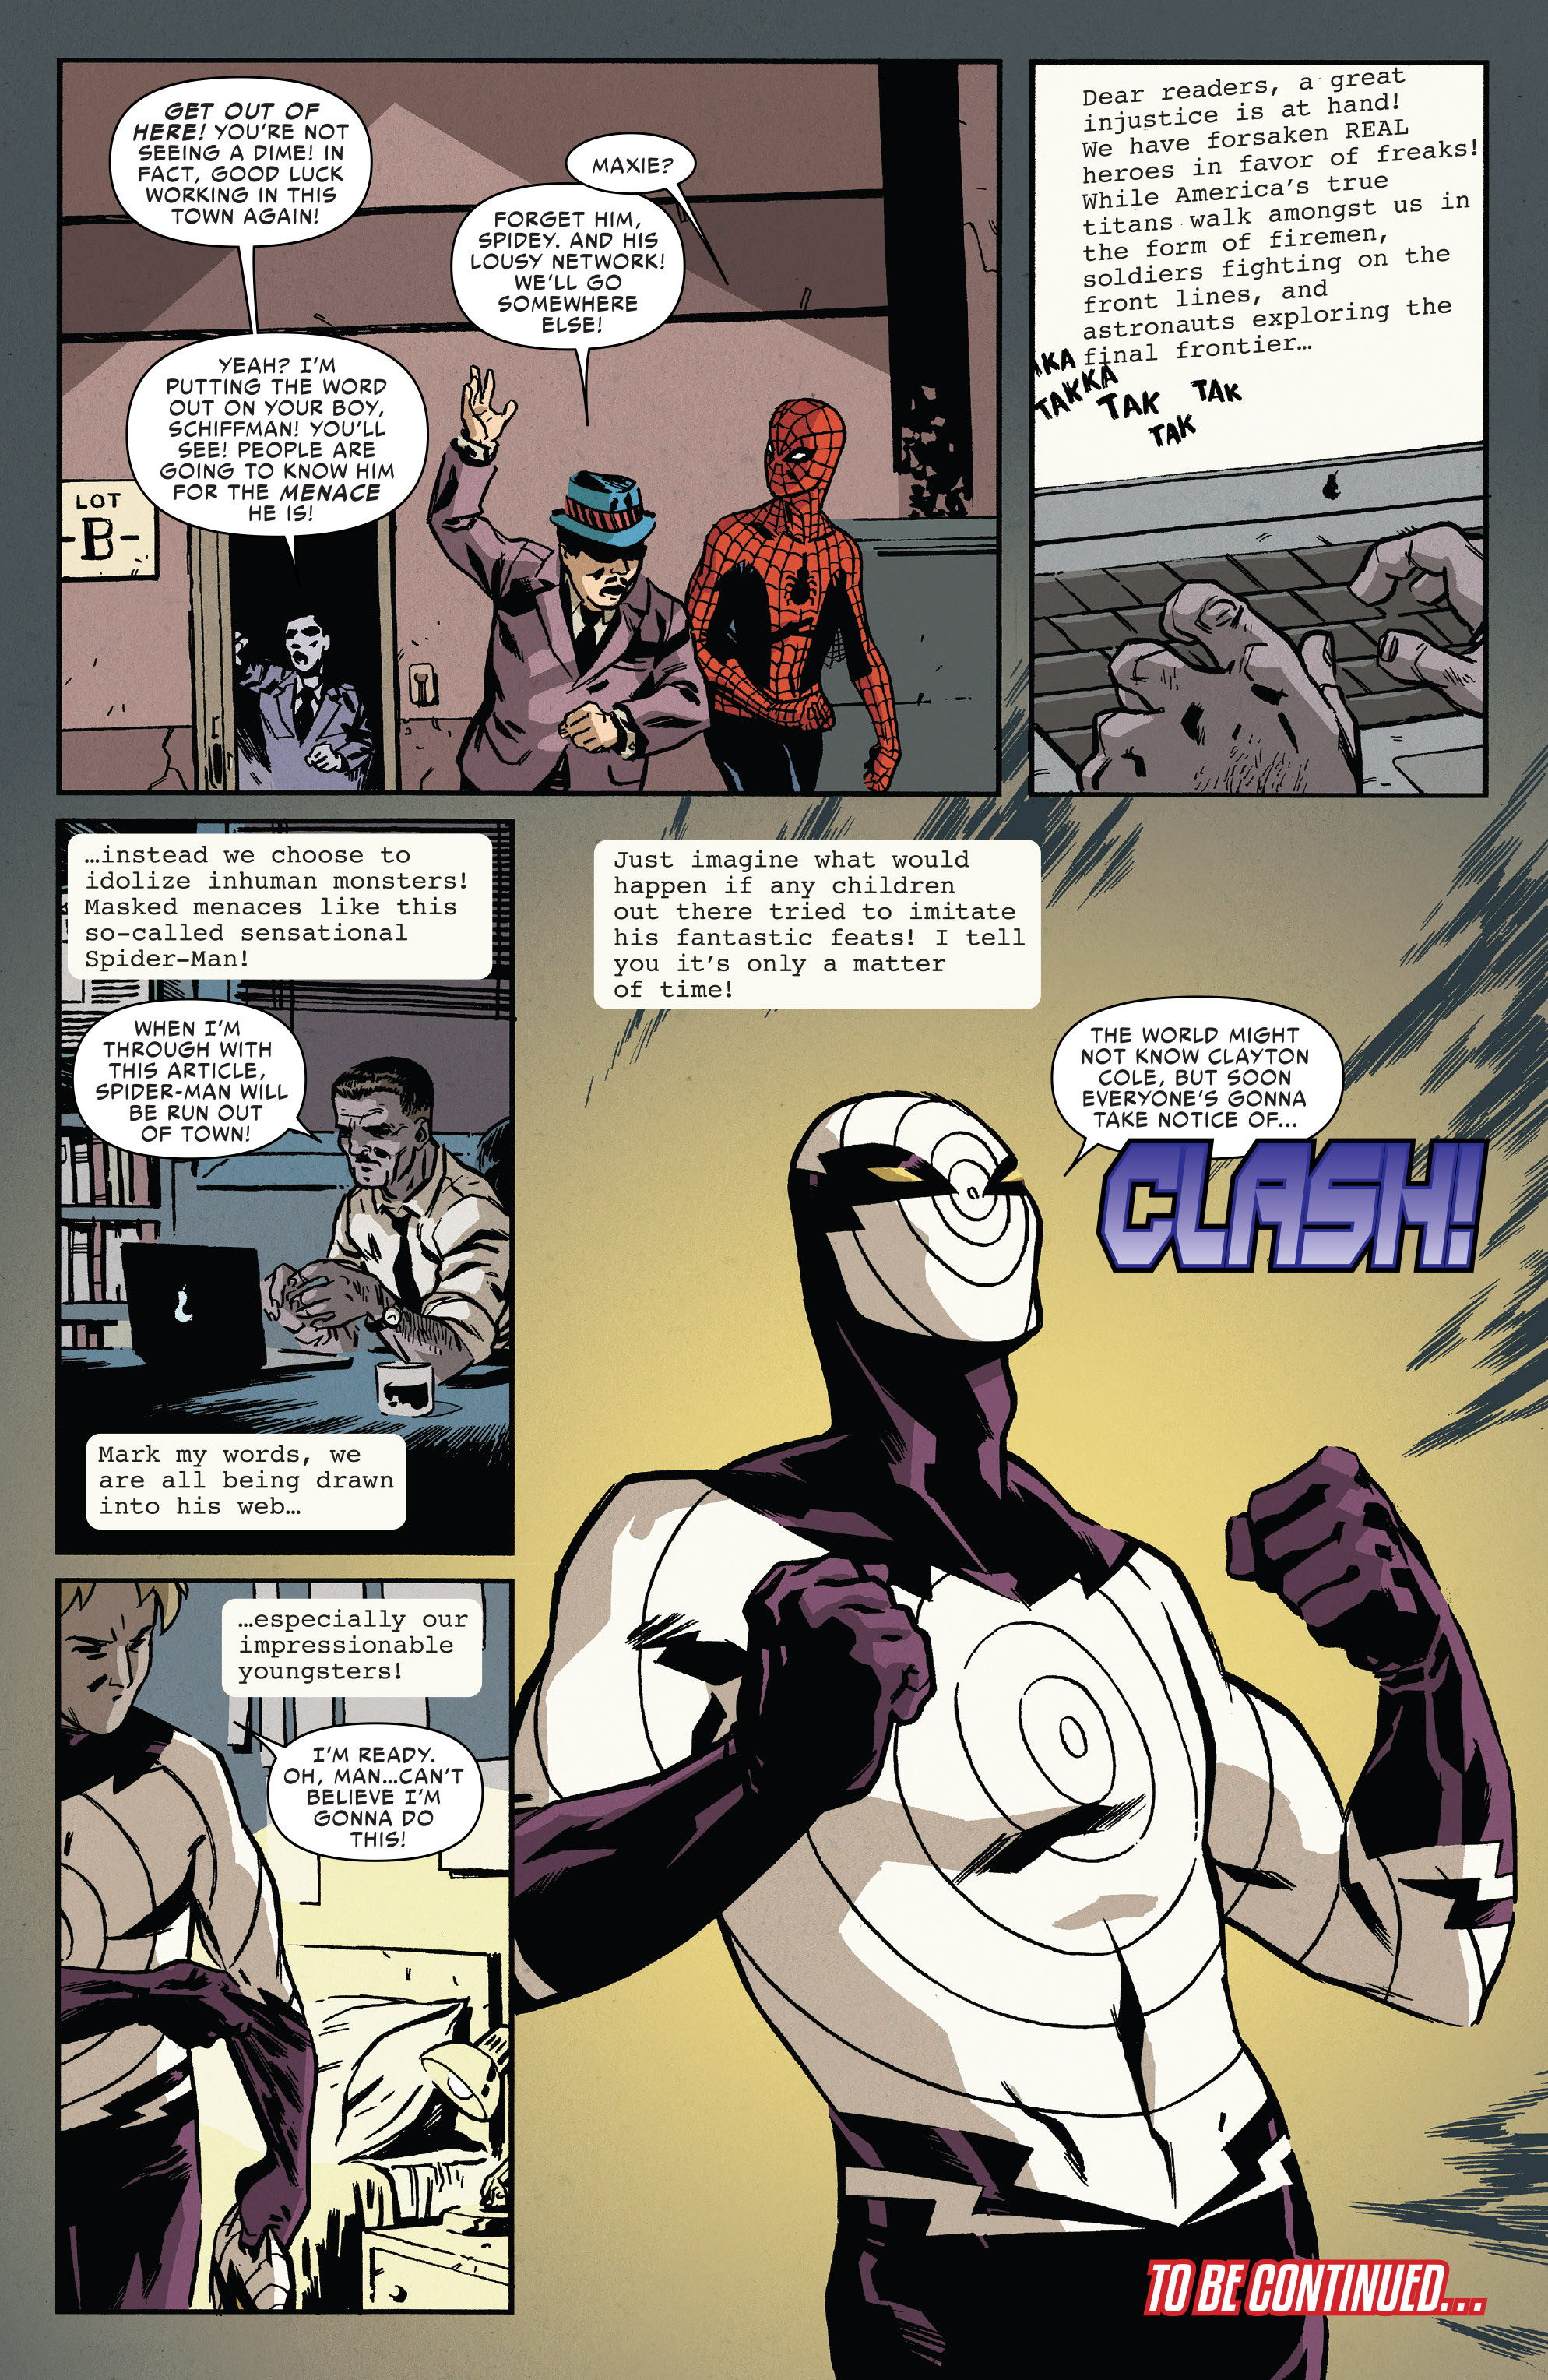 The Amazing Spider-Man (2014) issue 1.1 - Page 22